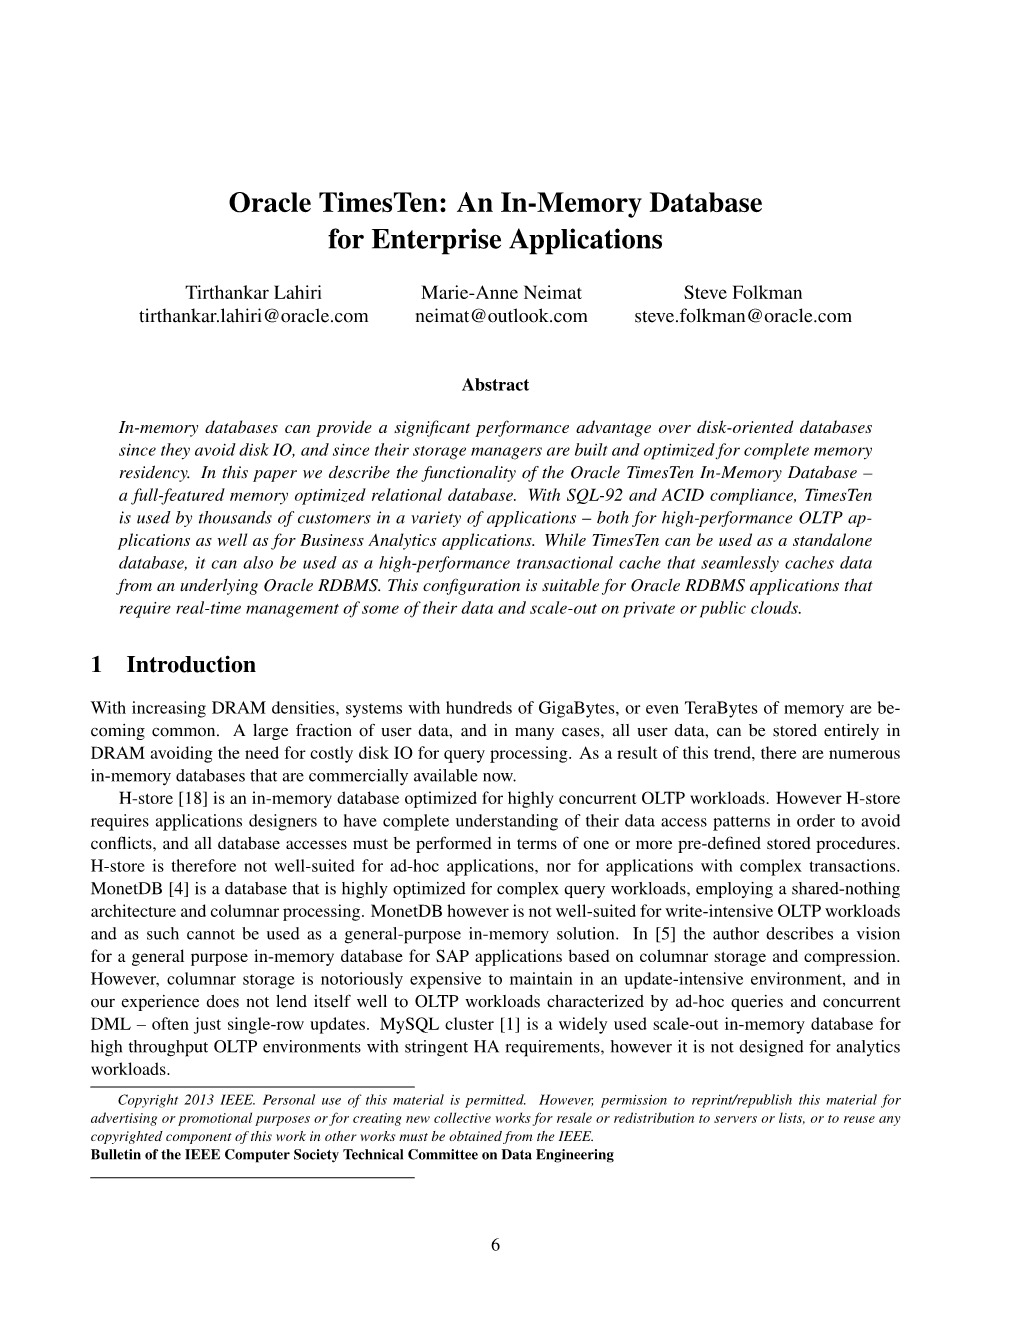 Oracle Timesten: an In-Memory Database for Enterprise Applications